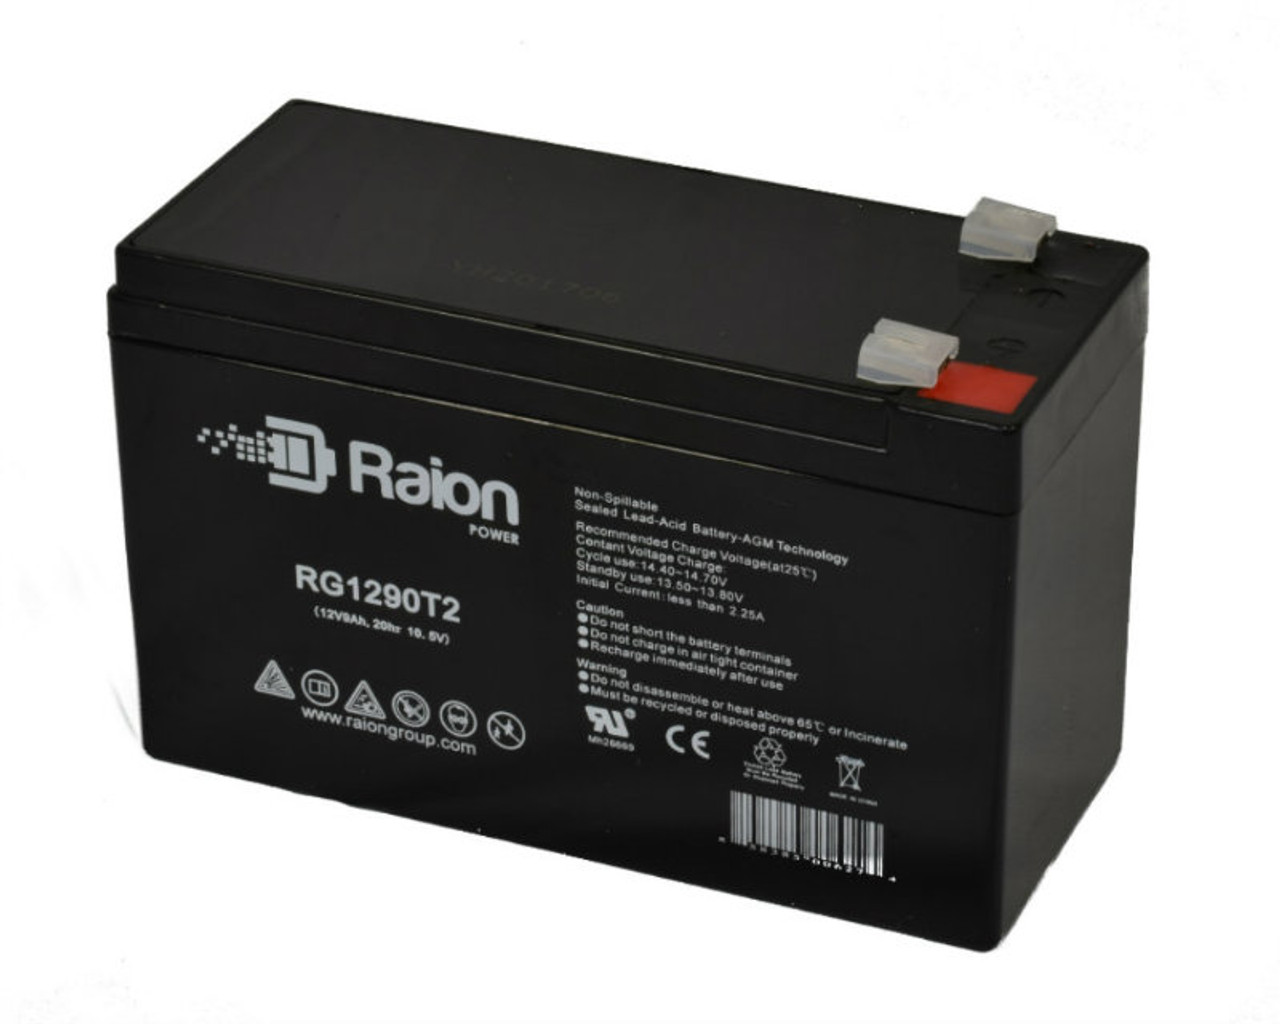 Raion Power Replacement 12V 9Ah Battery for Potter Electric PFC-4410-RCRG1290T2 - 1 Pack